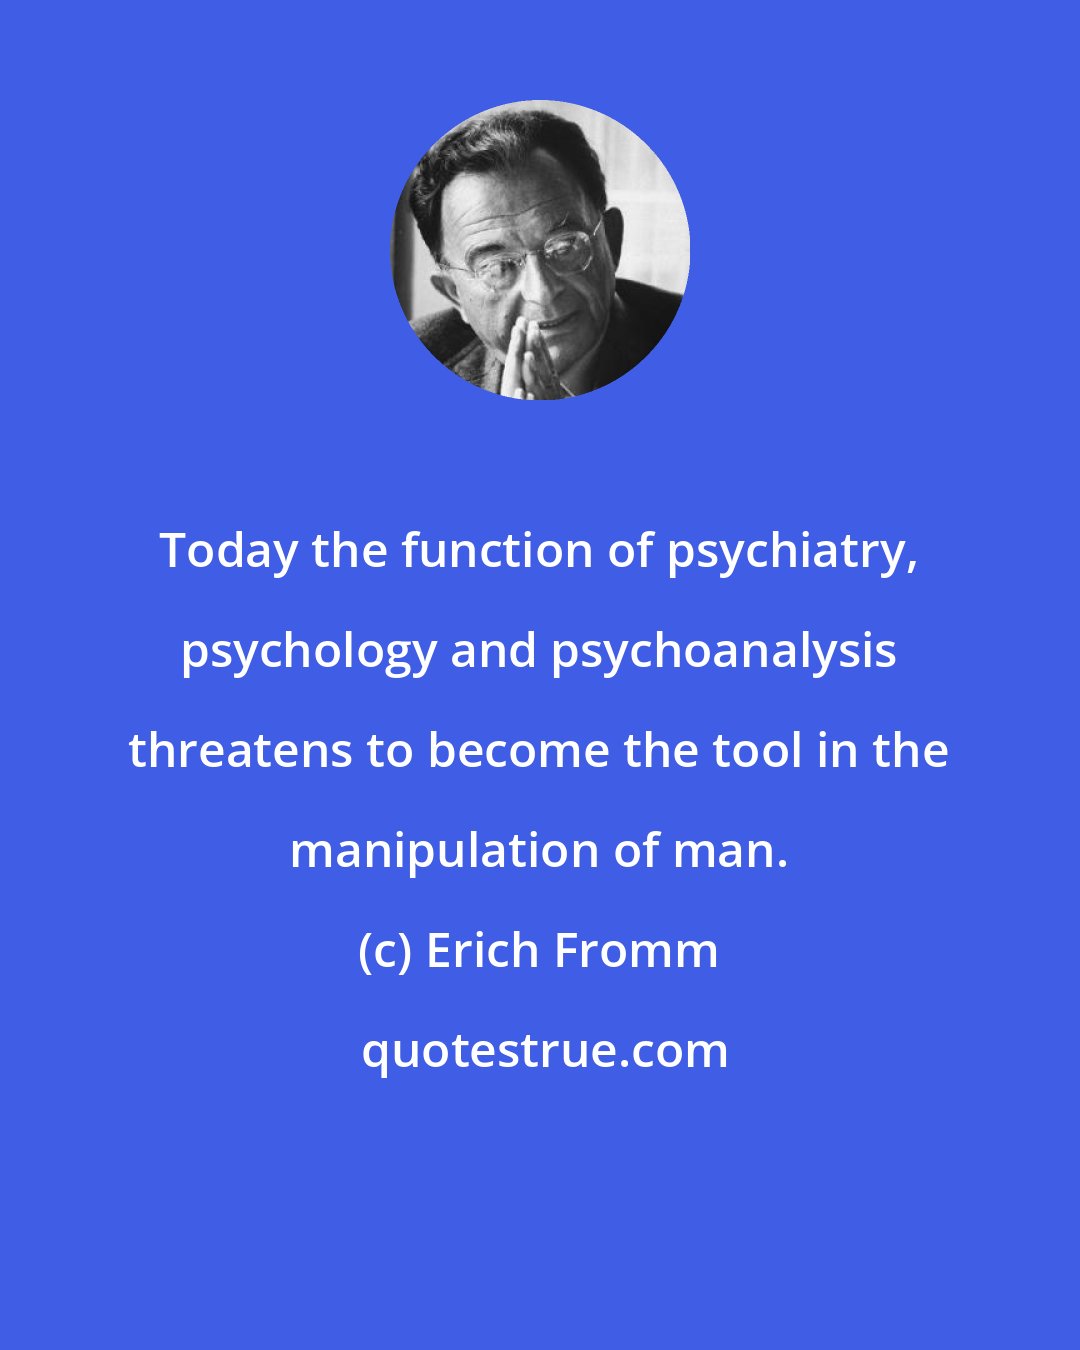 Erich Fromm: Today the function of psychiatry, psychology and psychoanalysis threatens to become the tool in the manipulation of man.